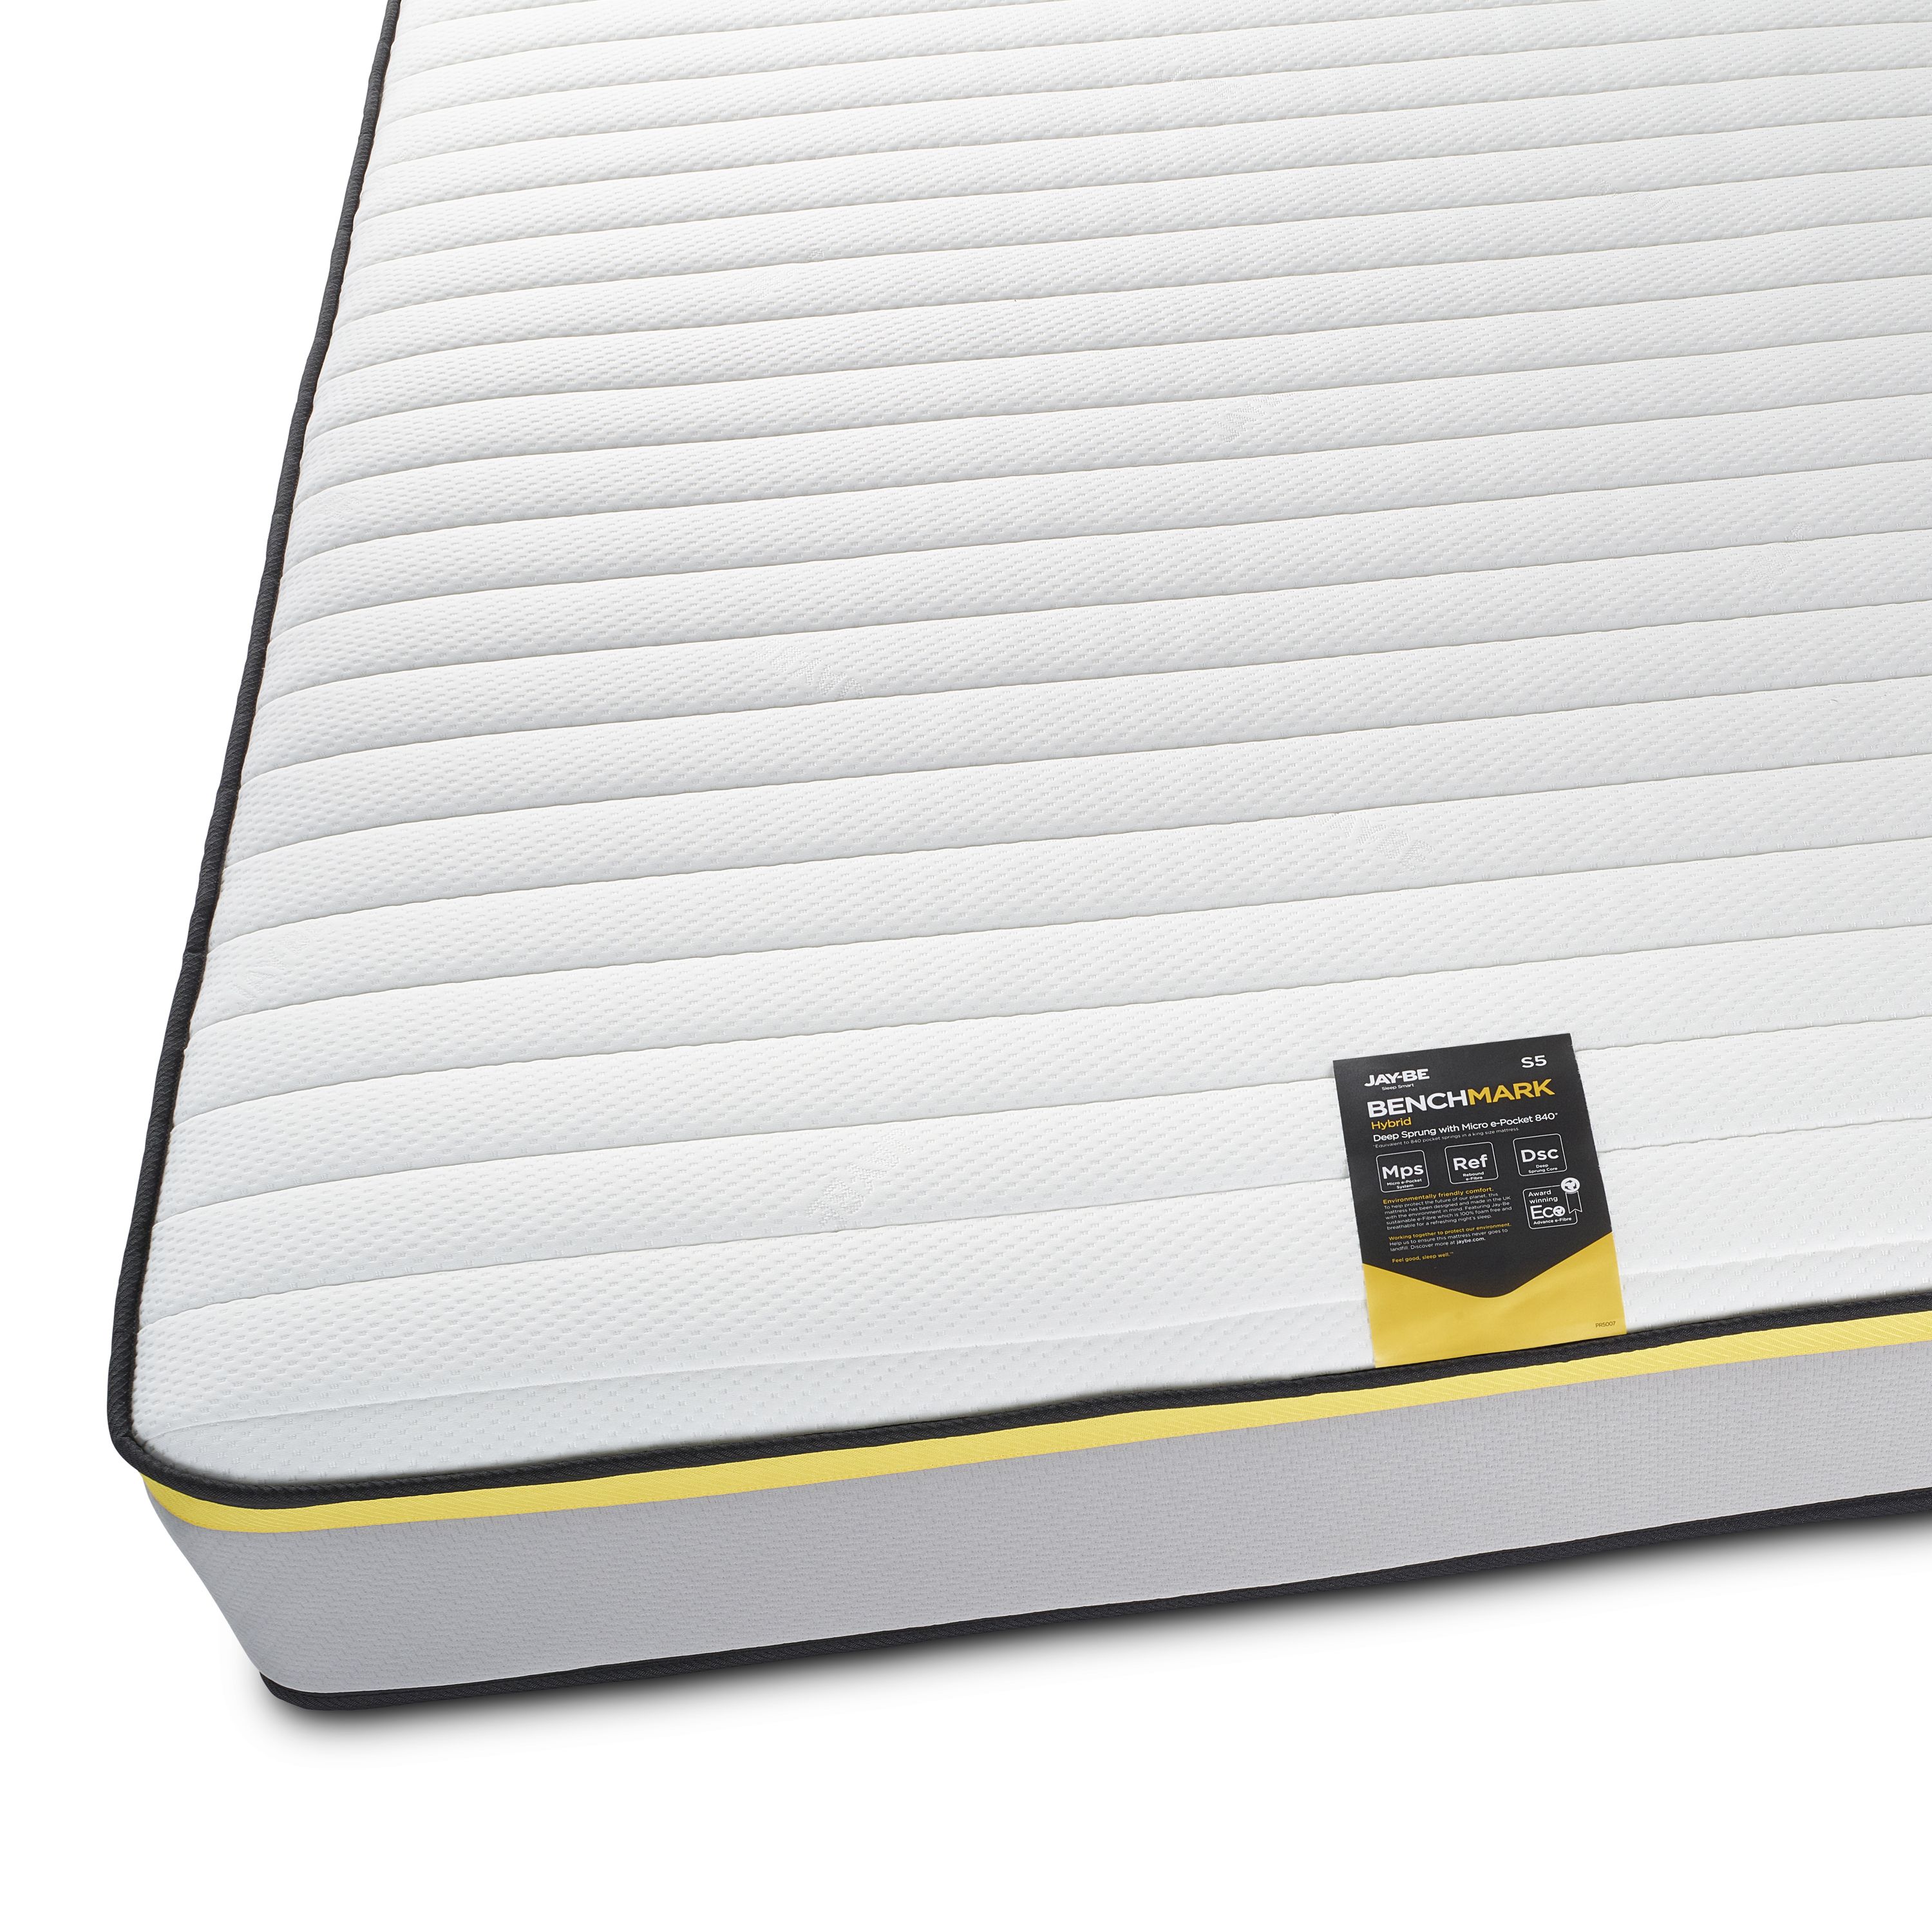 Jay-Be Benchmark S5 Hybrid Eco Friendly Open coil Water resistant Small double Mattress